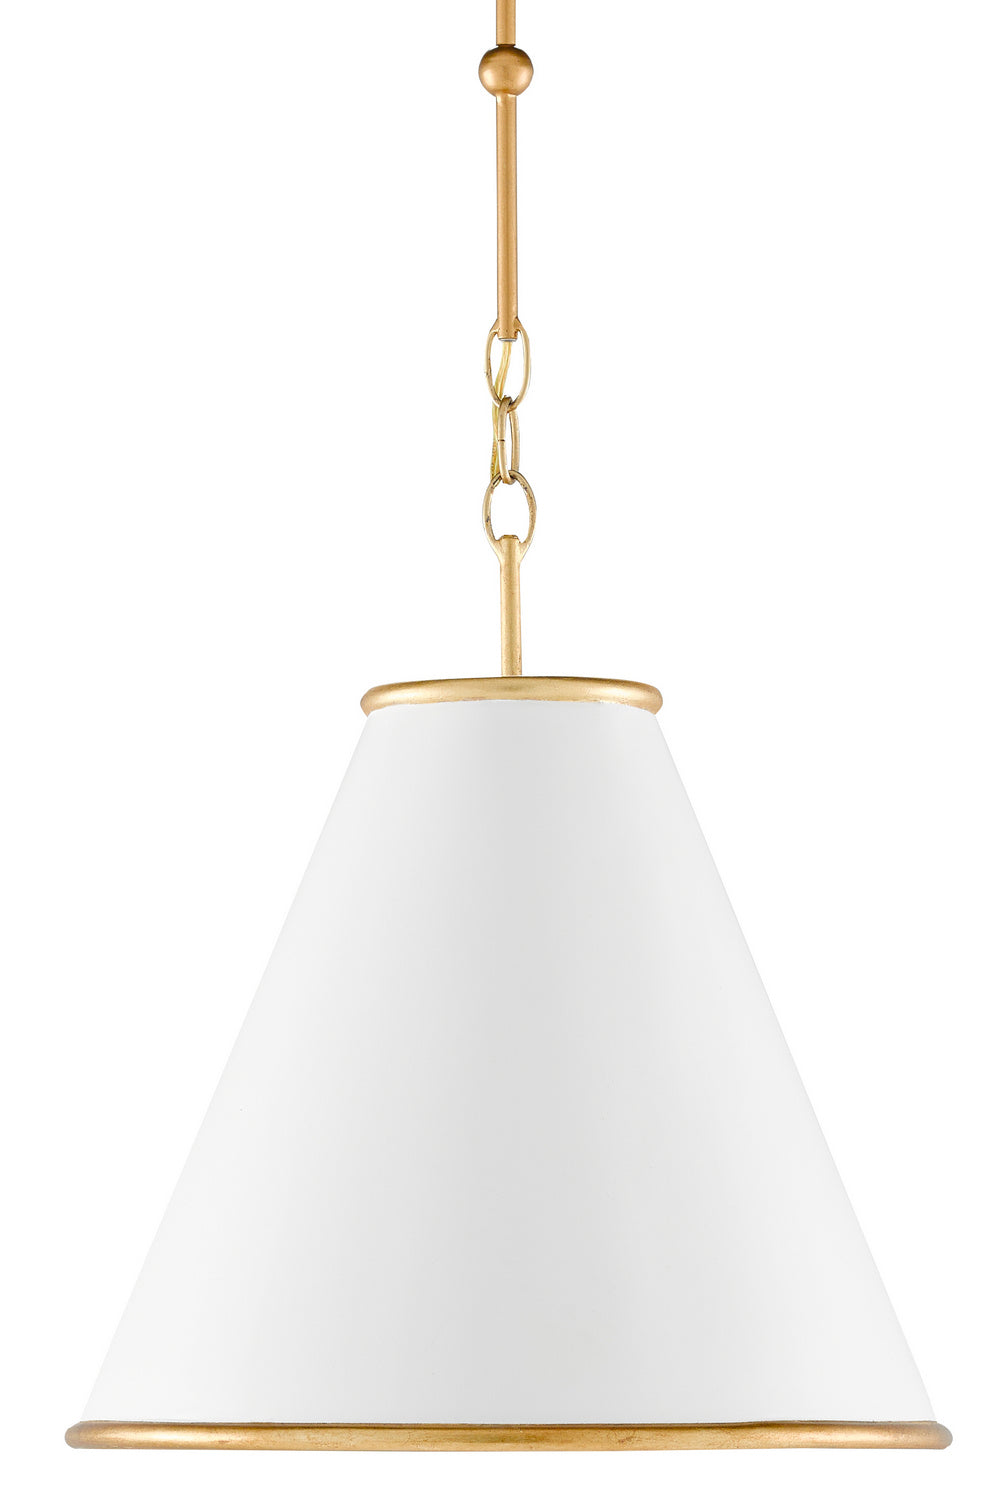 One Light Pendant from the Pierrepont collection in Painted Gesso White/Contemporary Gold Leaf/Painted Gold finish